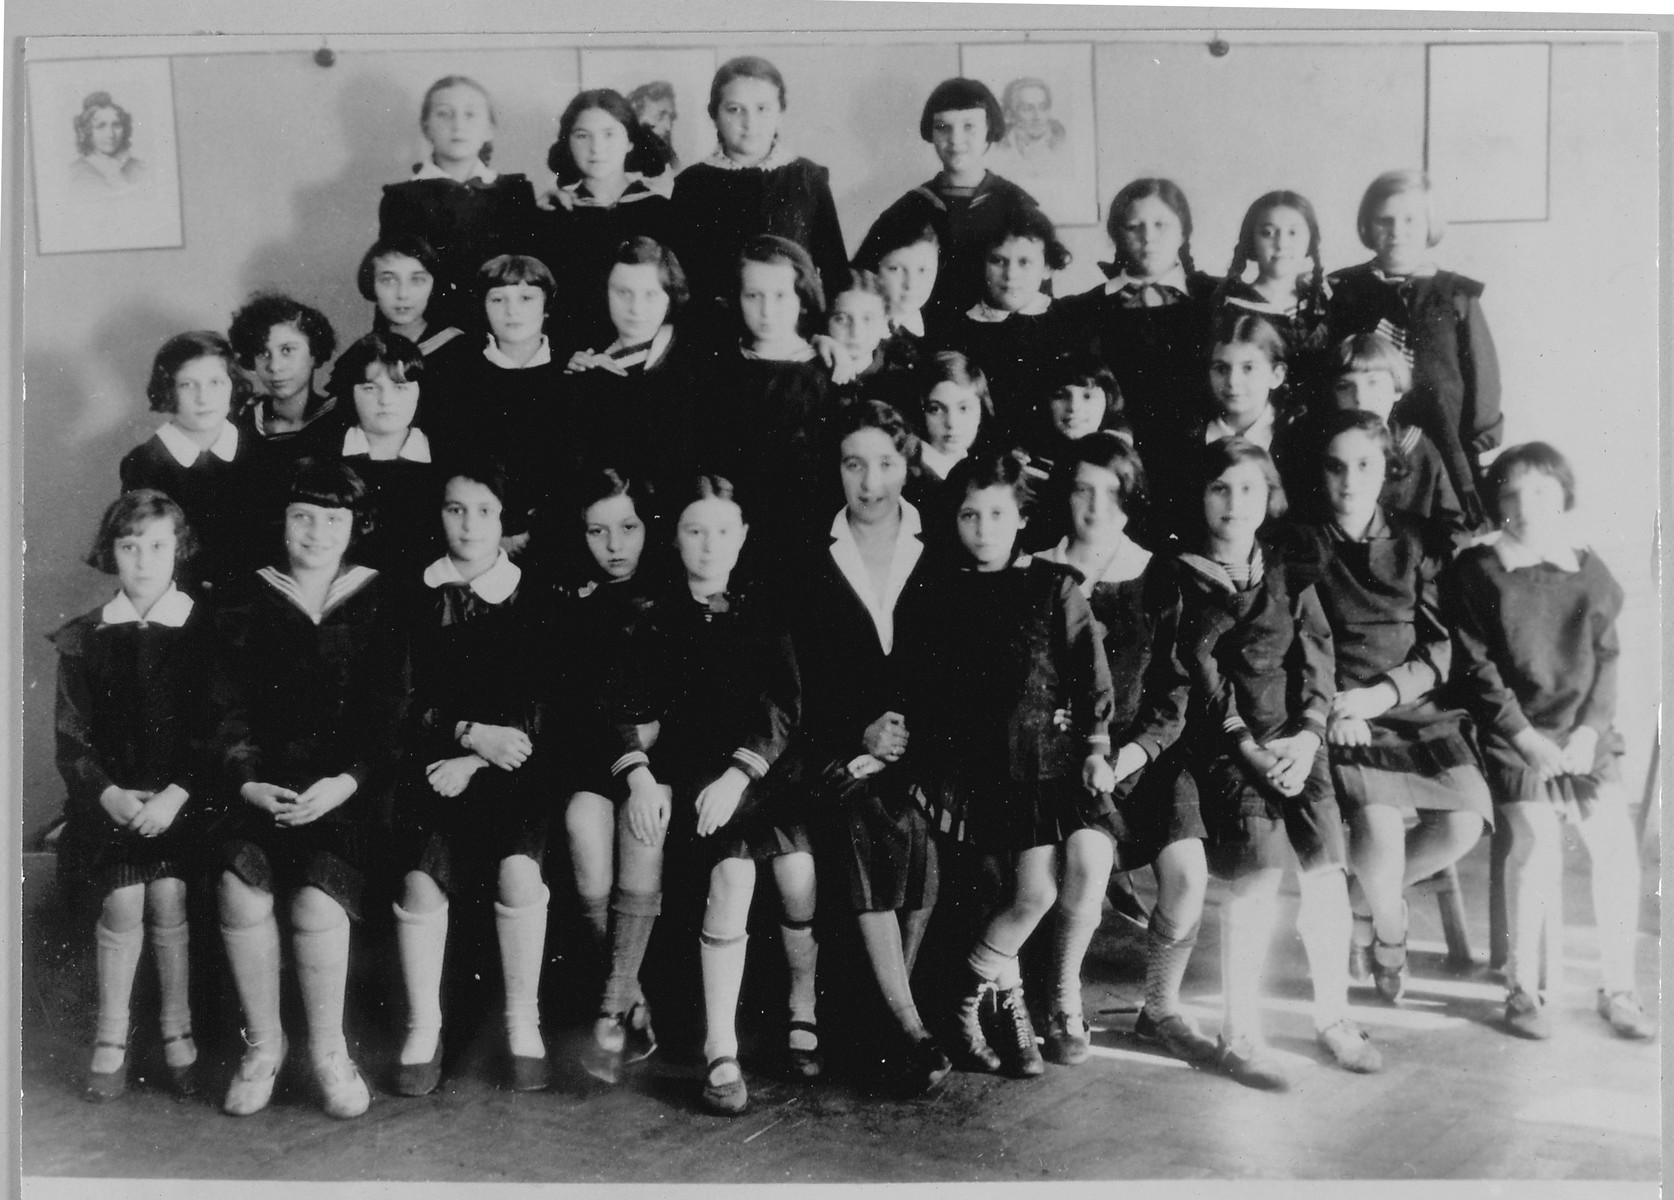 Rys Berkowicz's gymnasium class in 1932.   

Rys Berkowicz is seated to the right of the teacher.